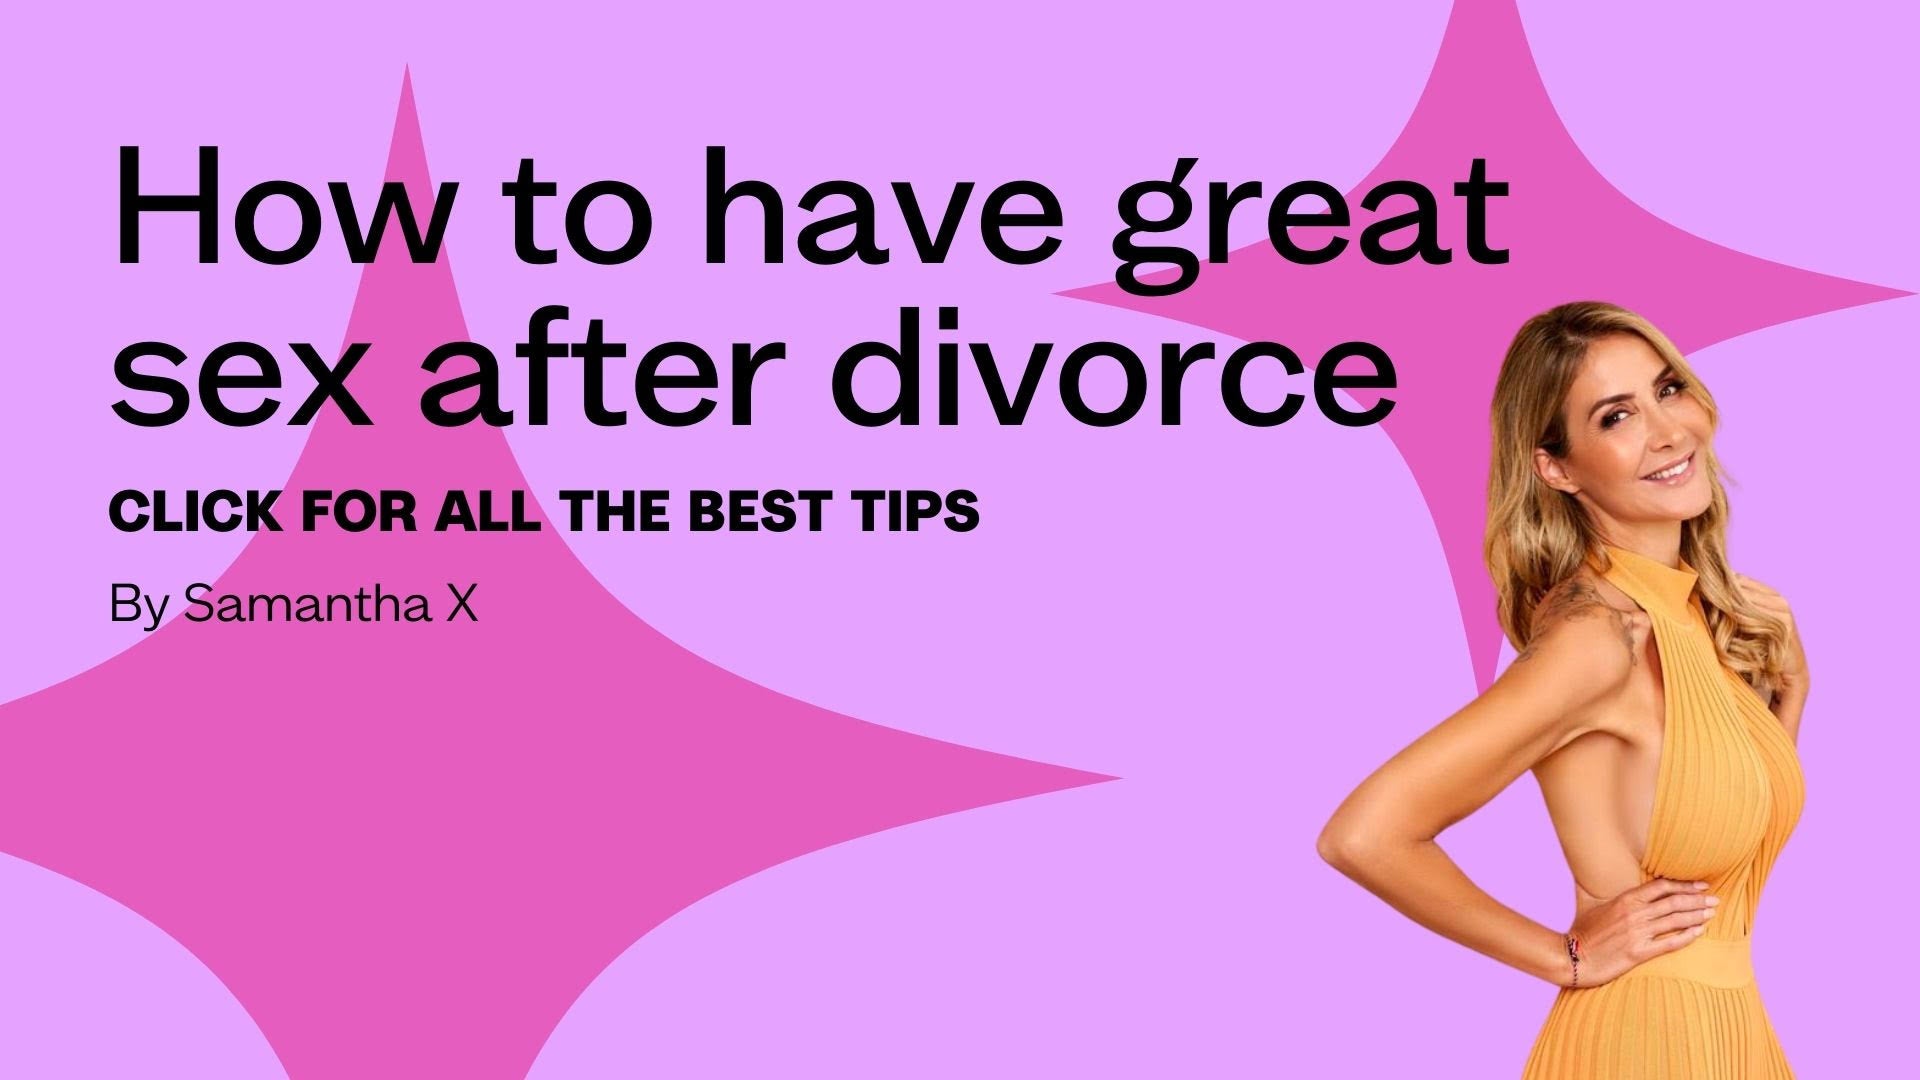 How to have great sex after divorce by Samantha X